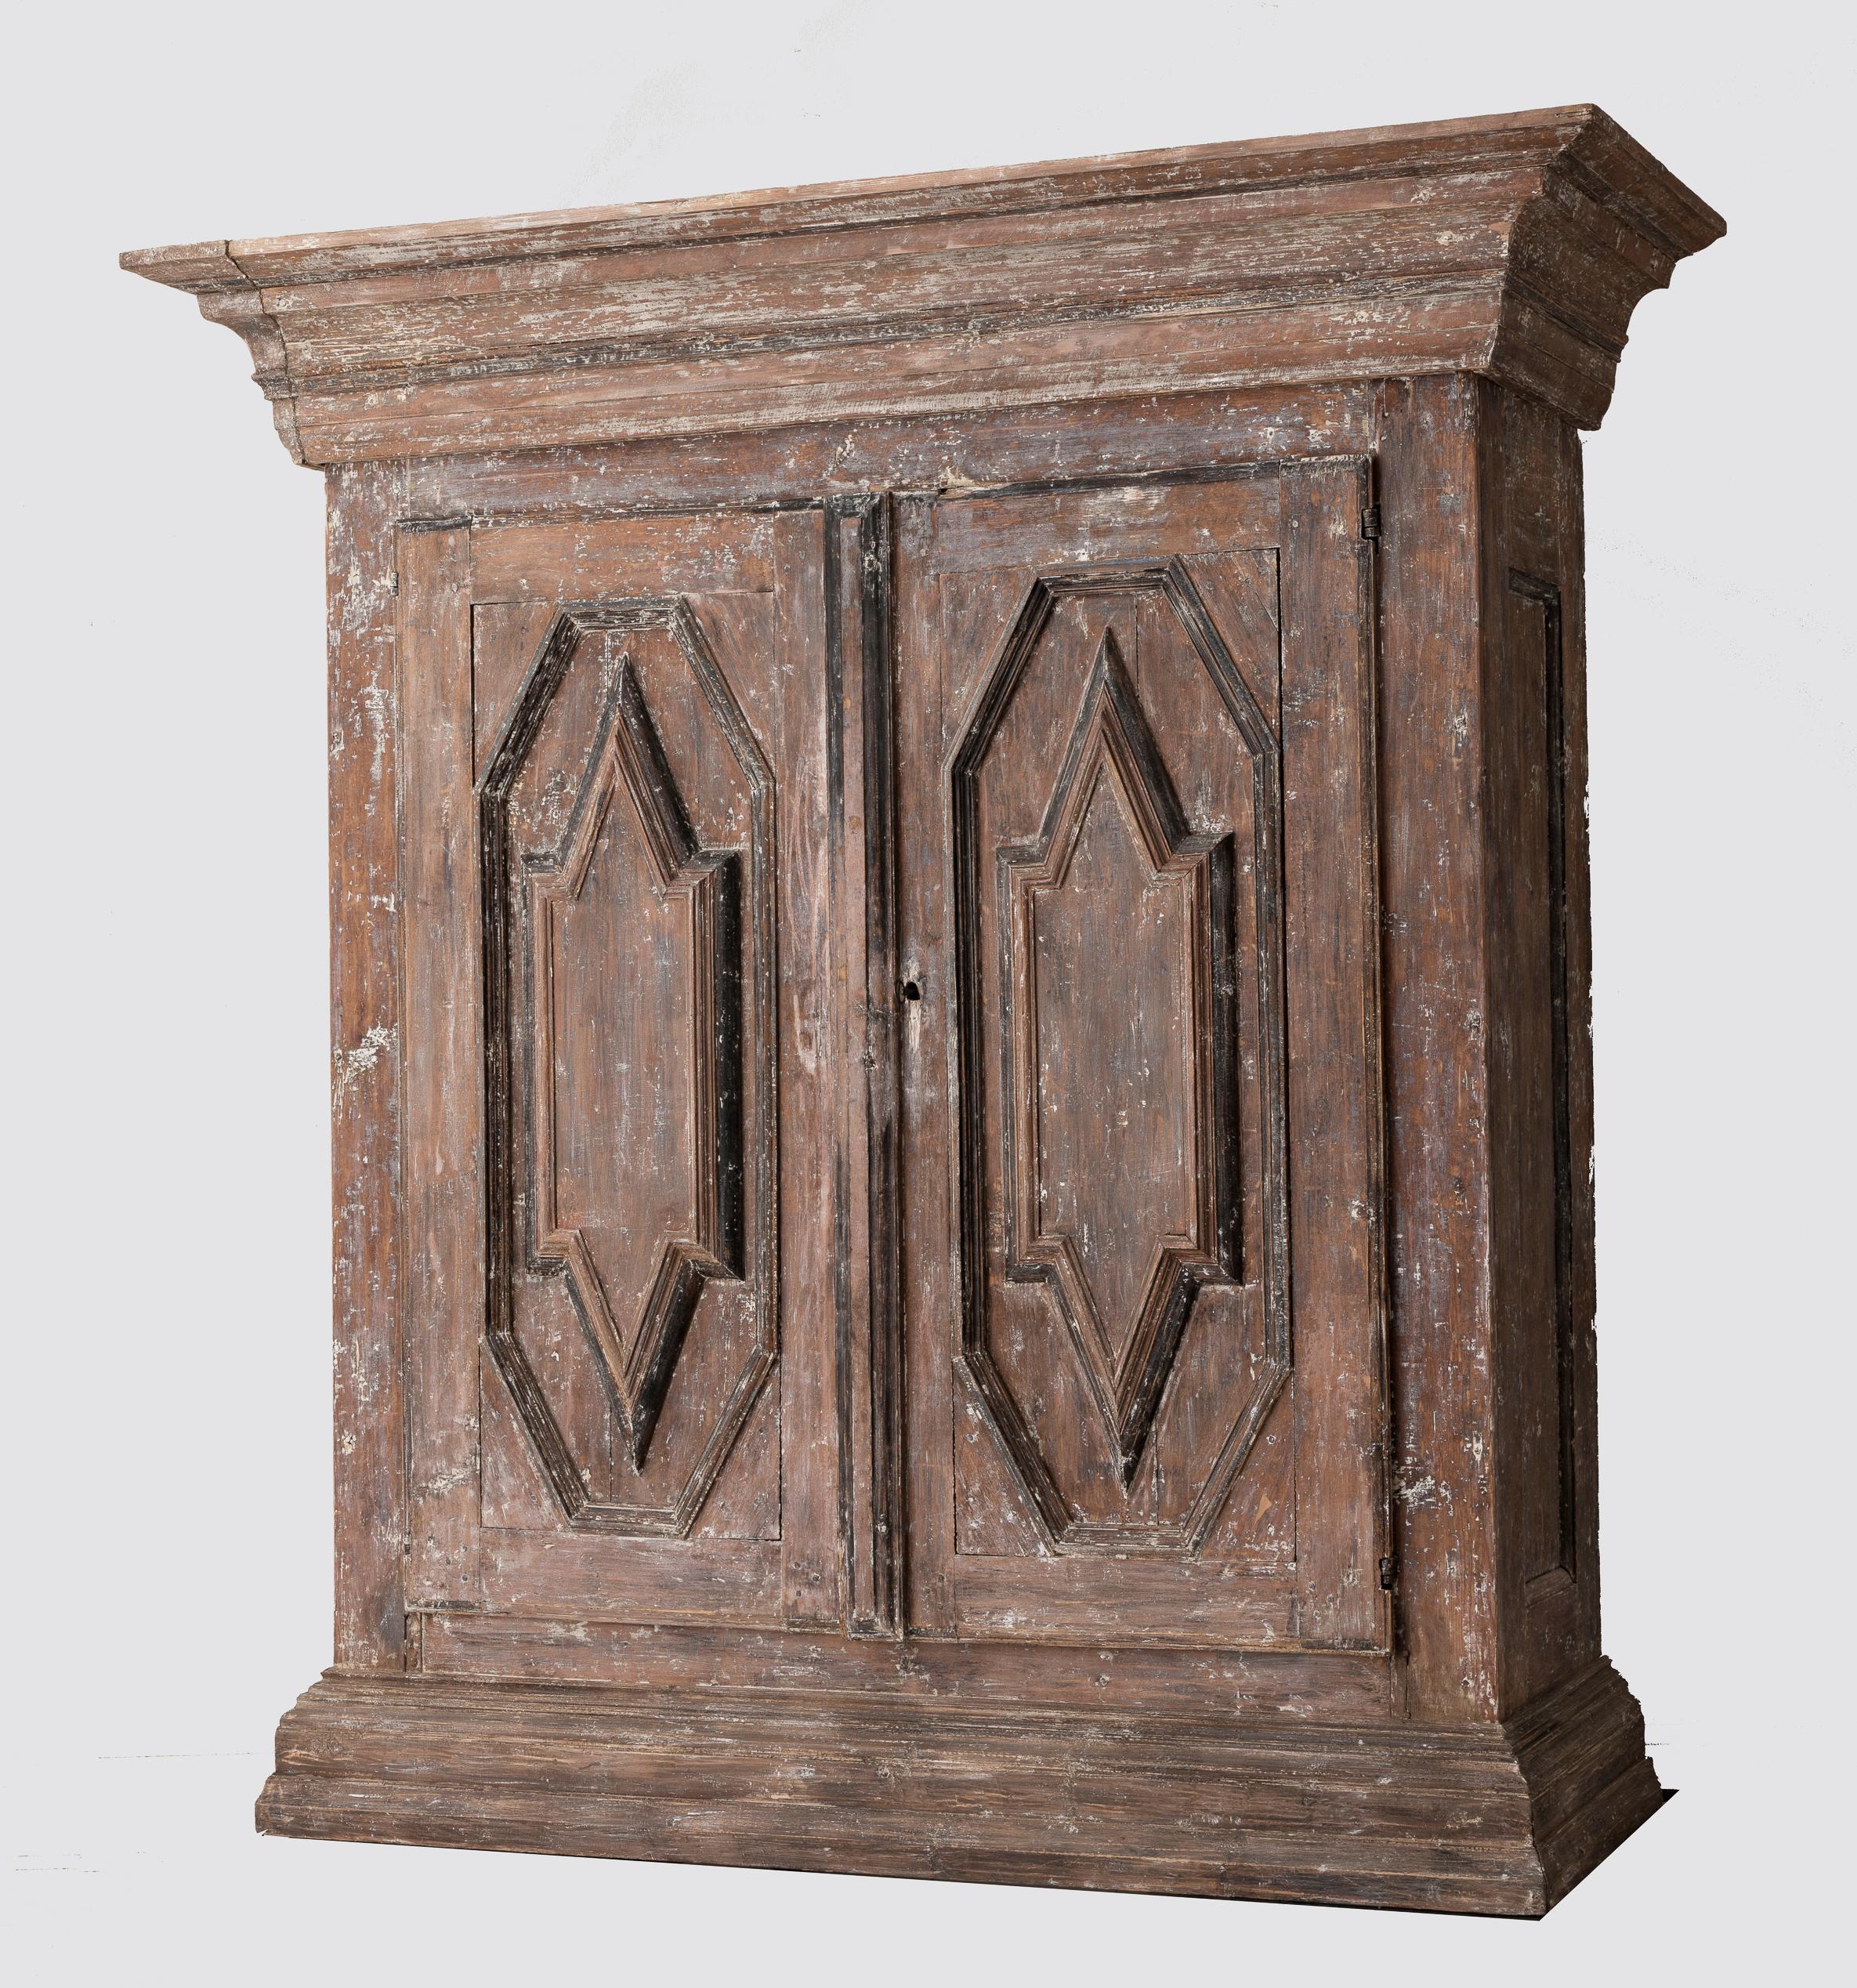 Hand-Crafted 19th Century Northern European Baroque-Style Rustic Carved Armoire Cabinet